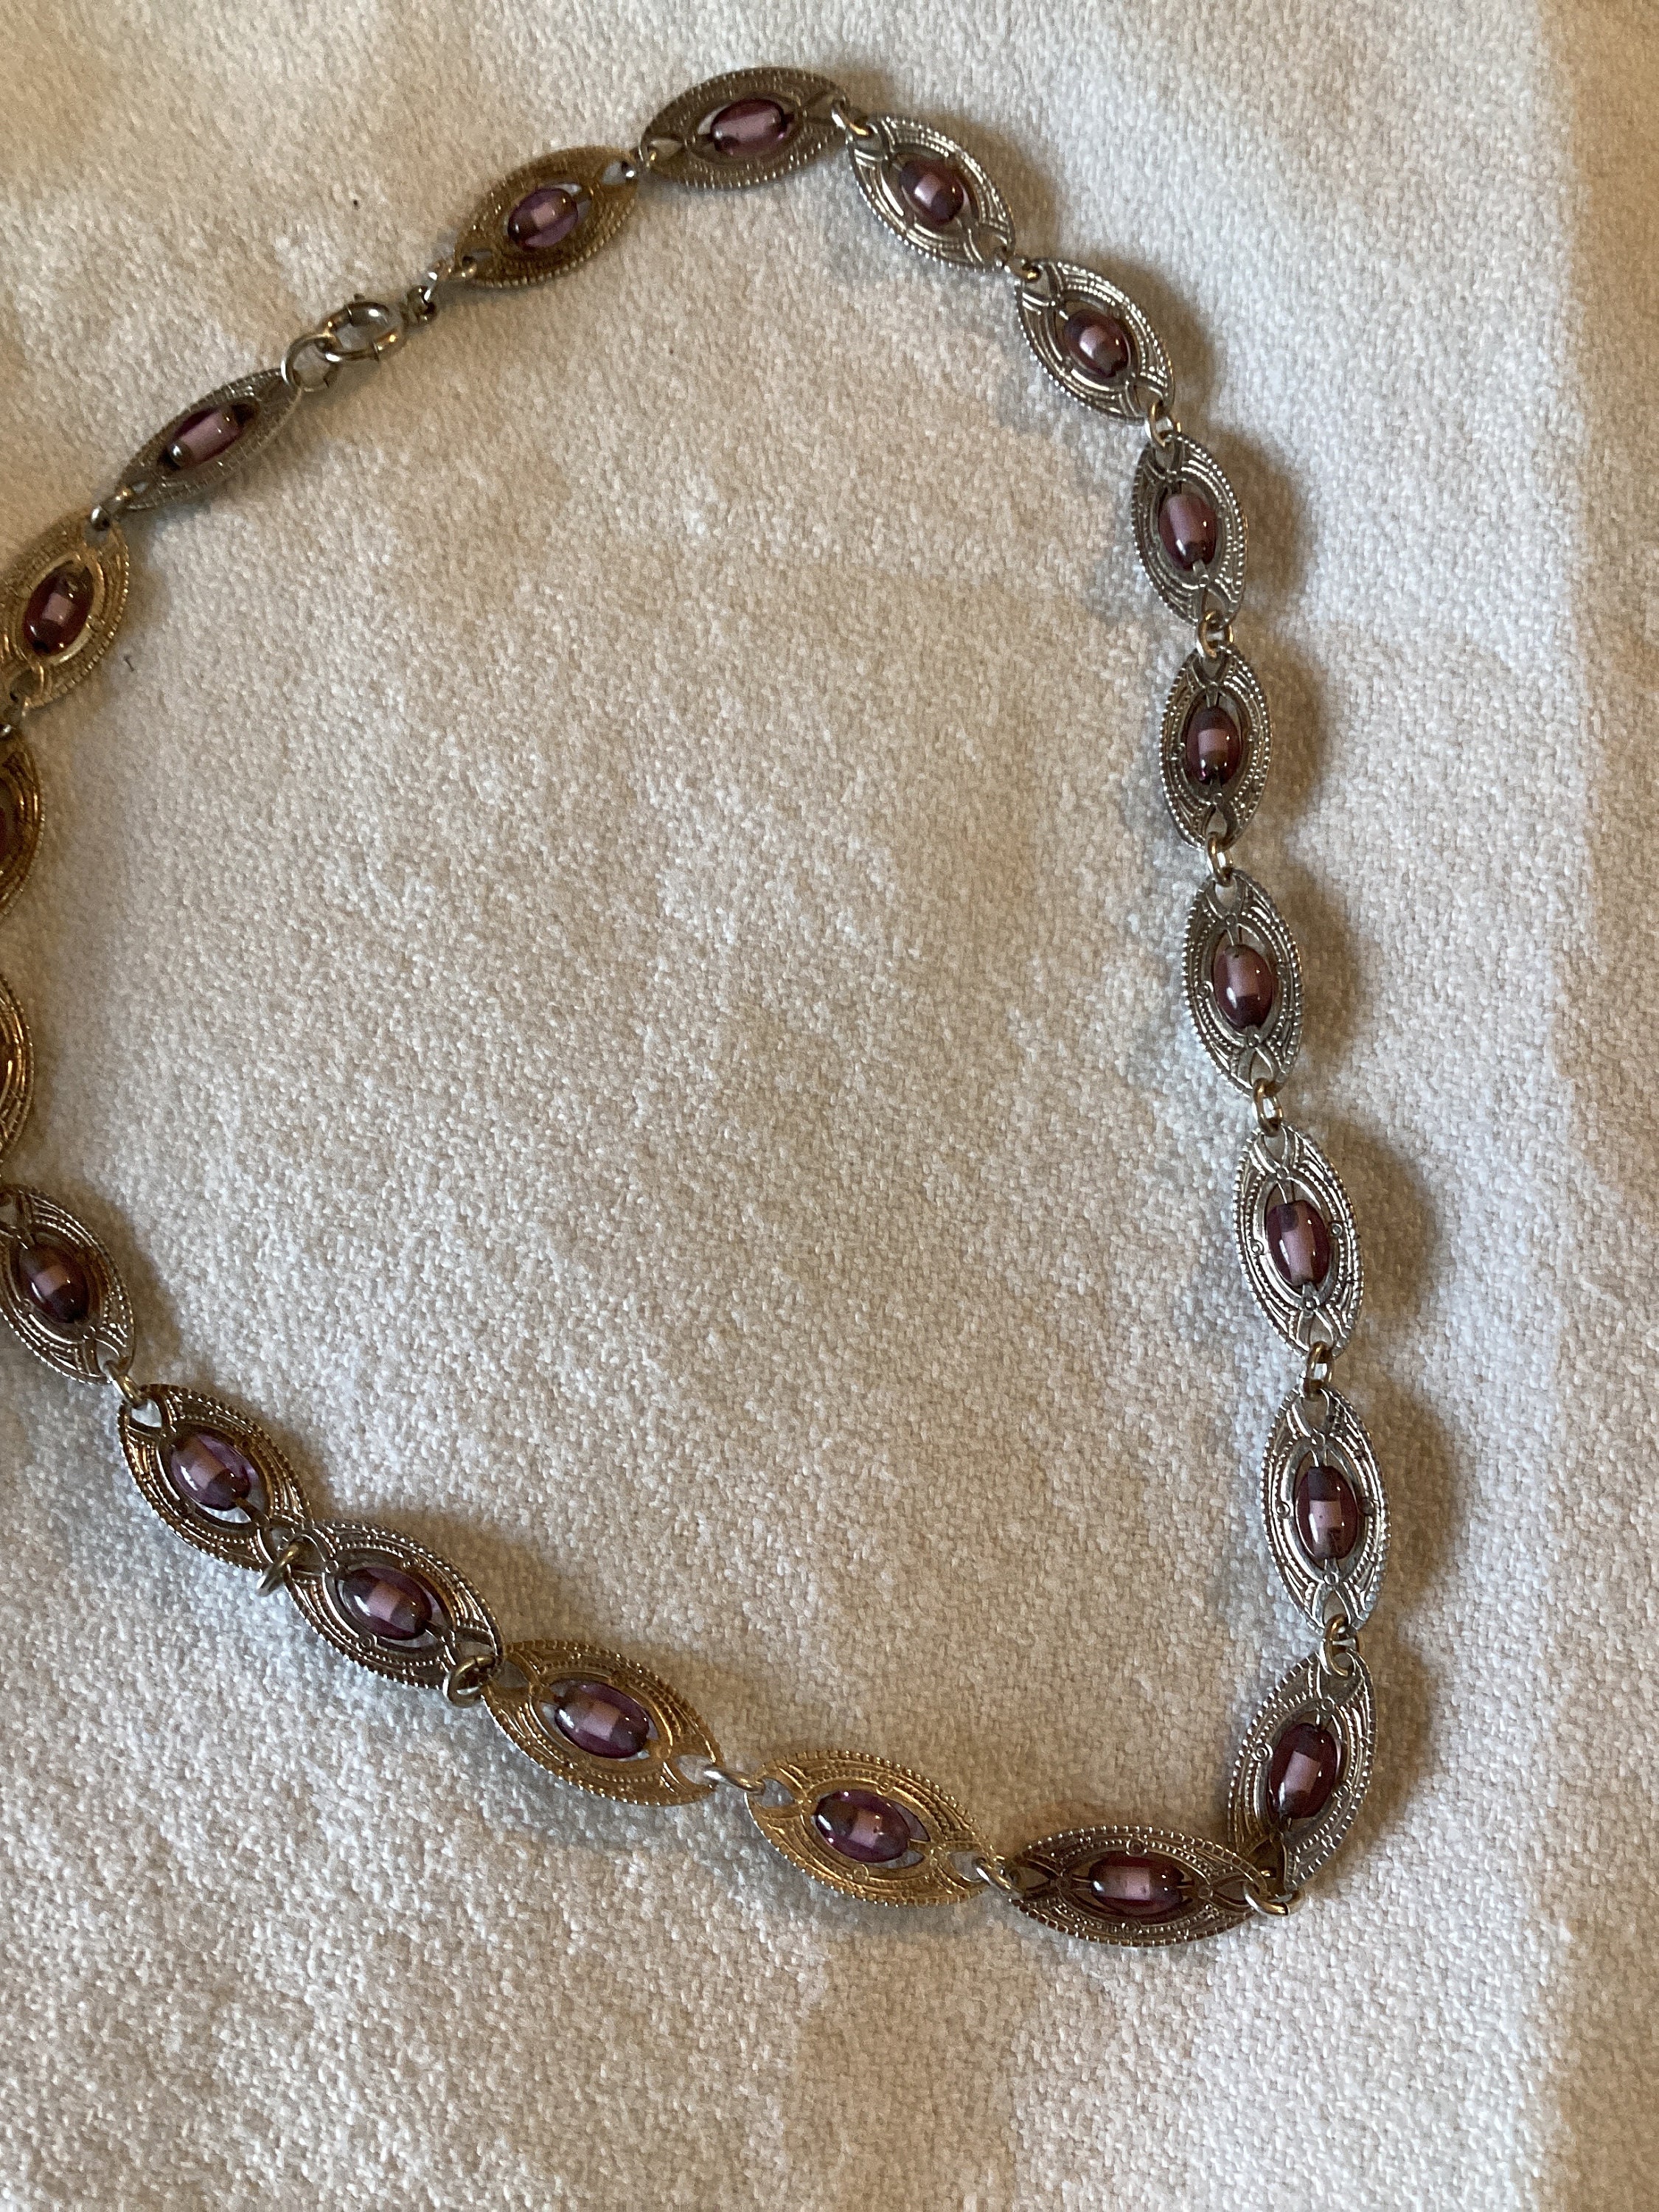 Vintage Sterling Silver Double Handmade Beaded Necklace “Pearls”